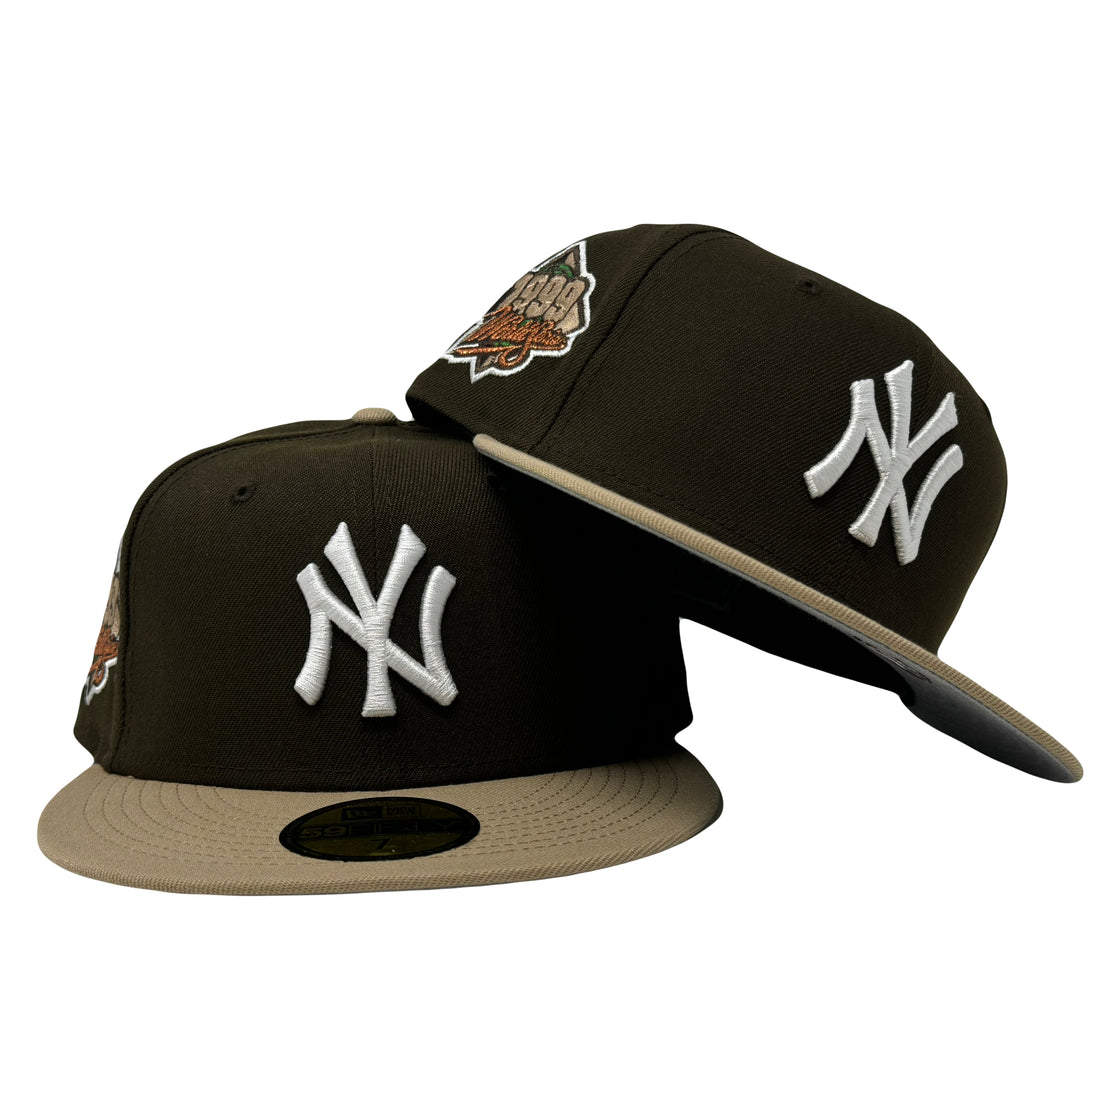 New York Yankees 1999 World Series Mocha Color 5950 New Era Fitted Hat